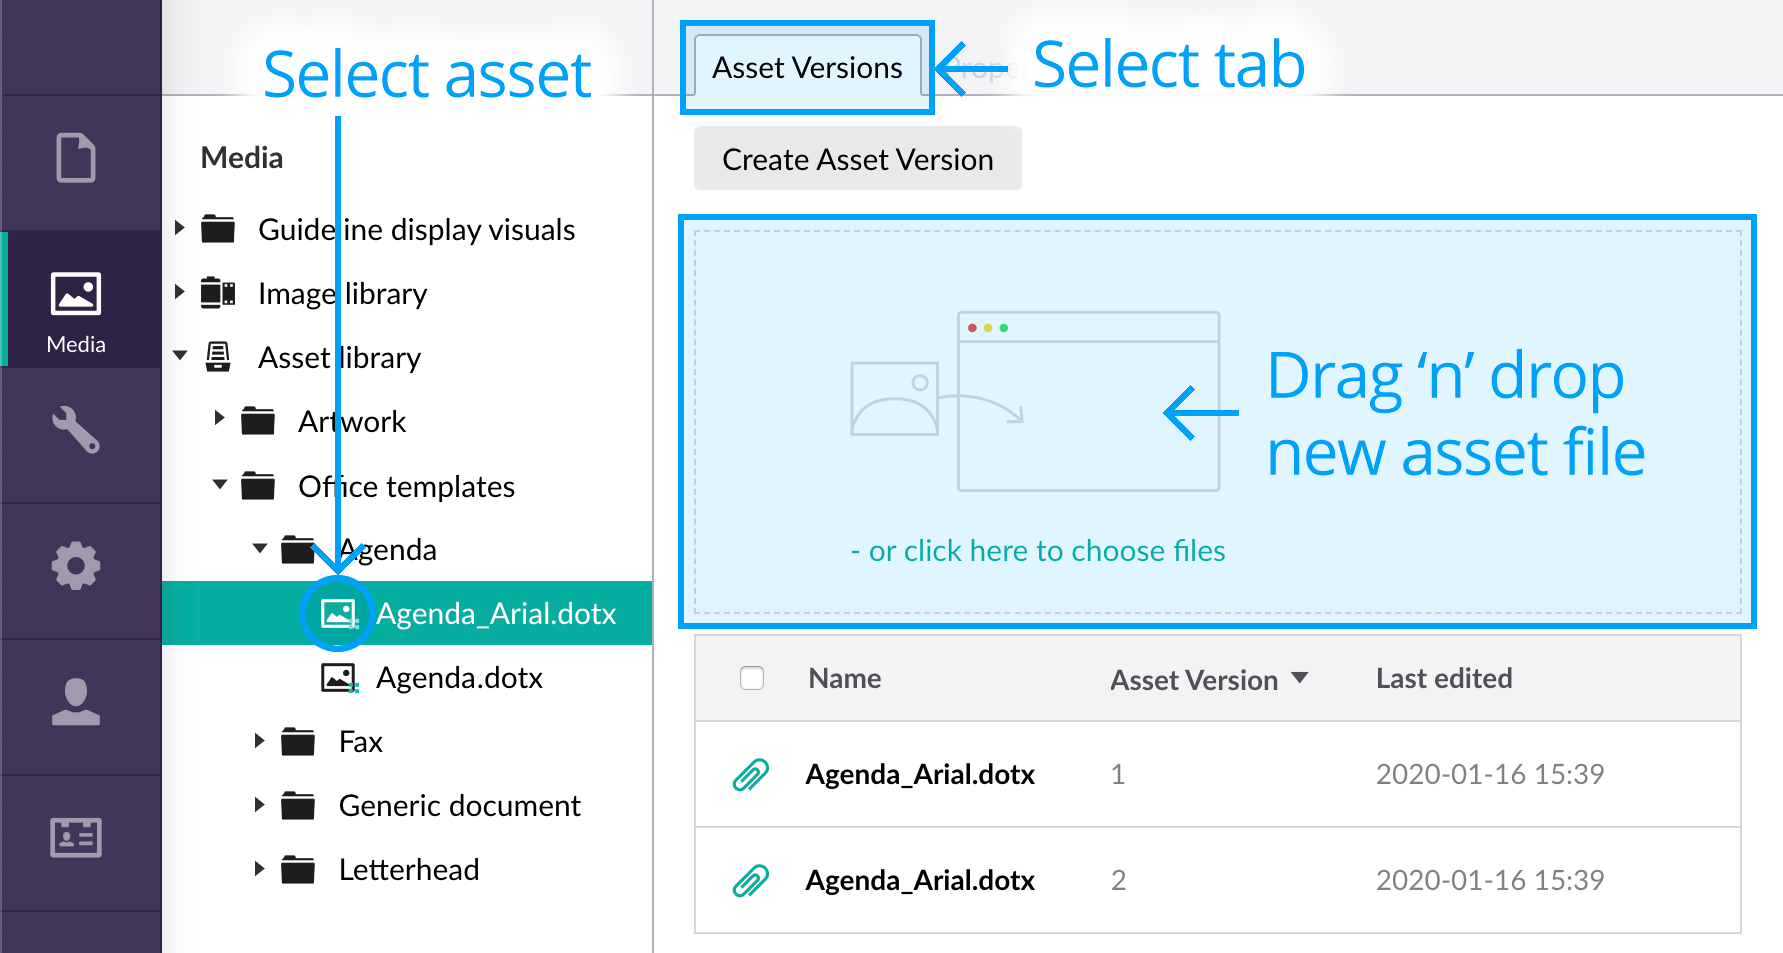 Drag and drop new asset into the asset versions upload area